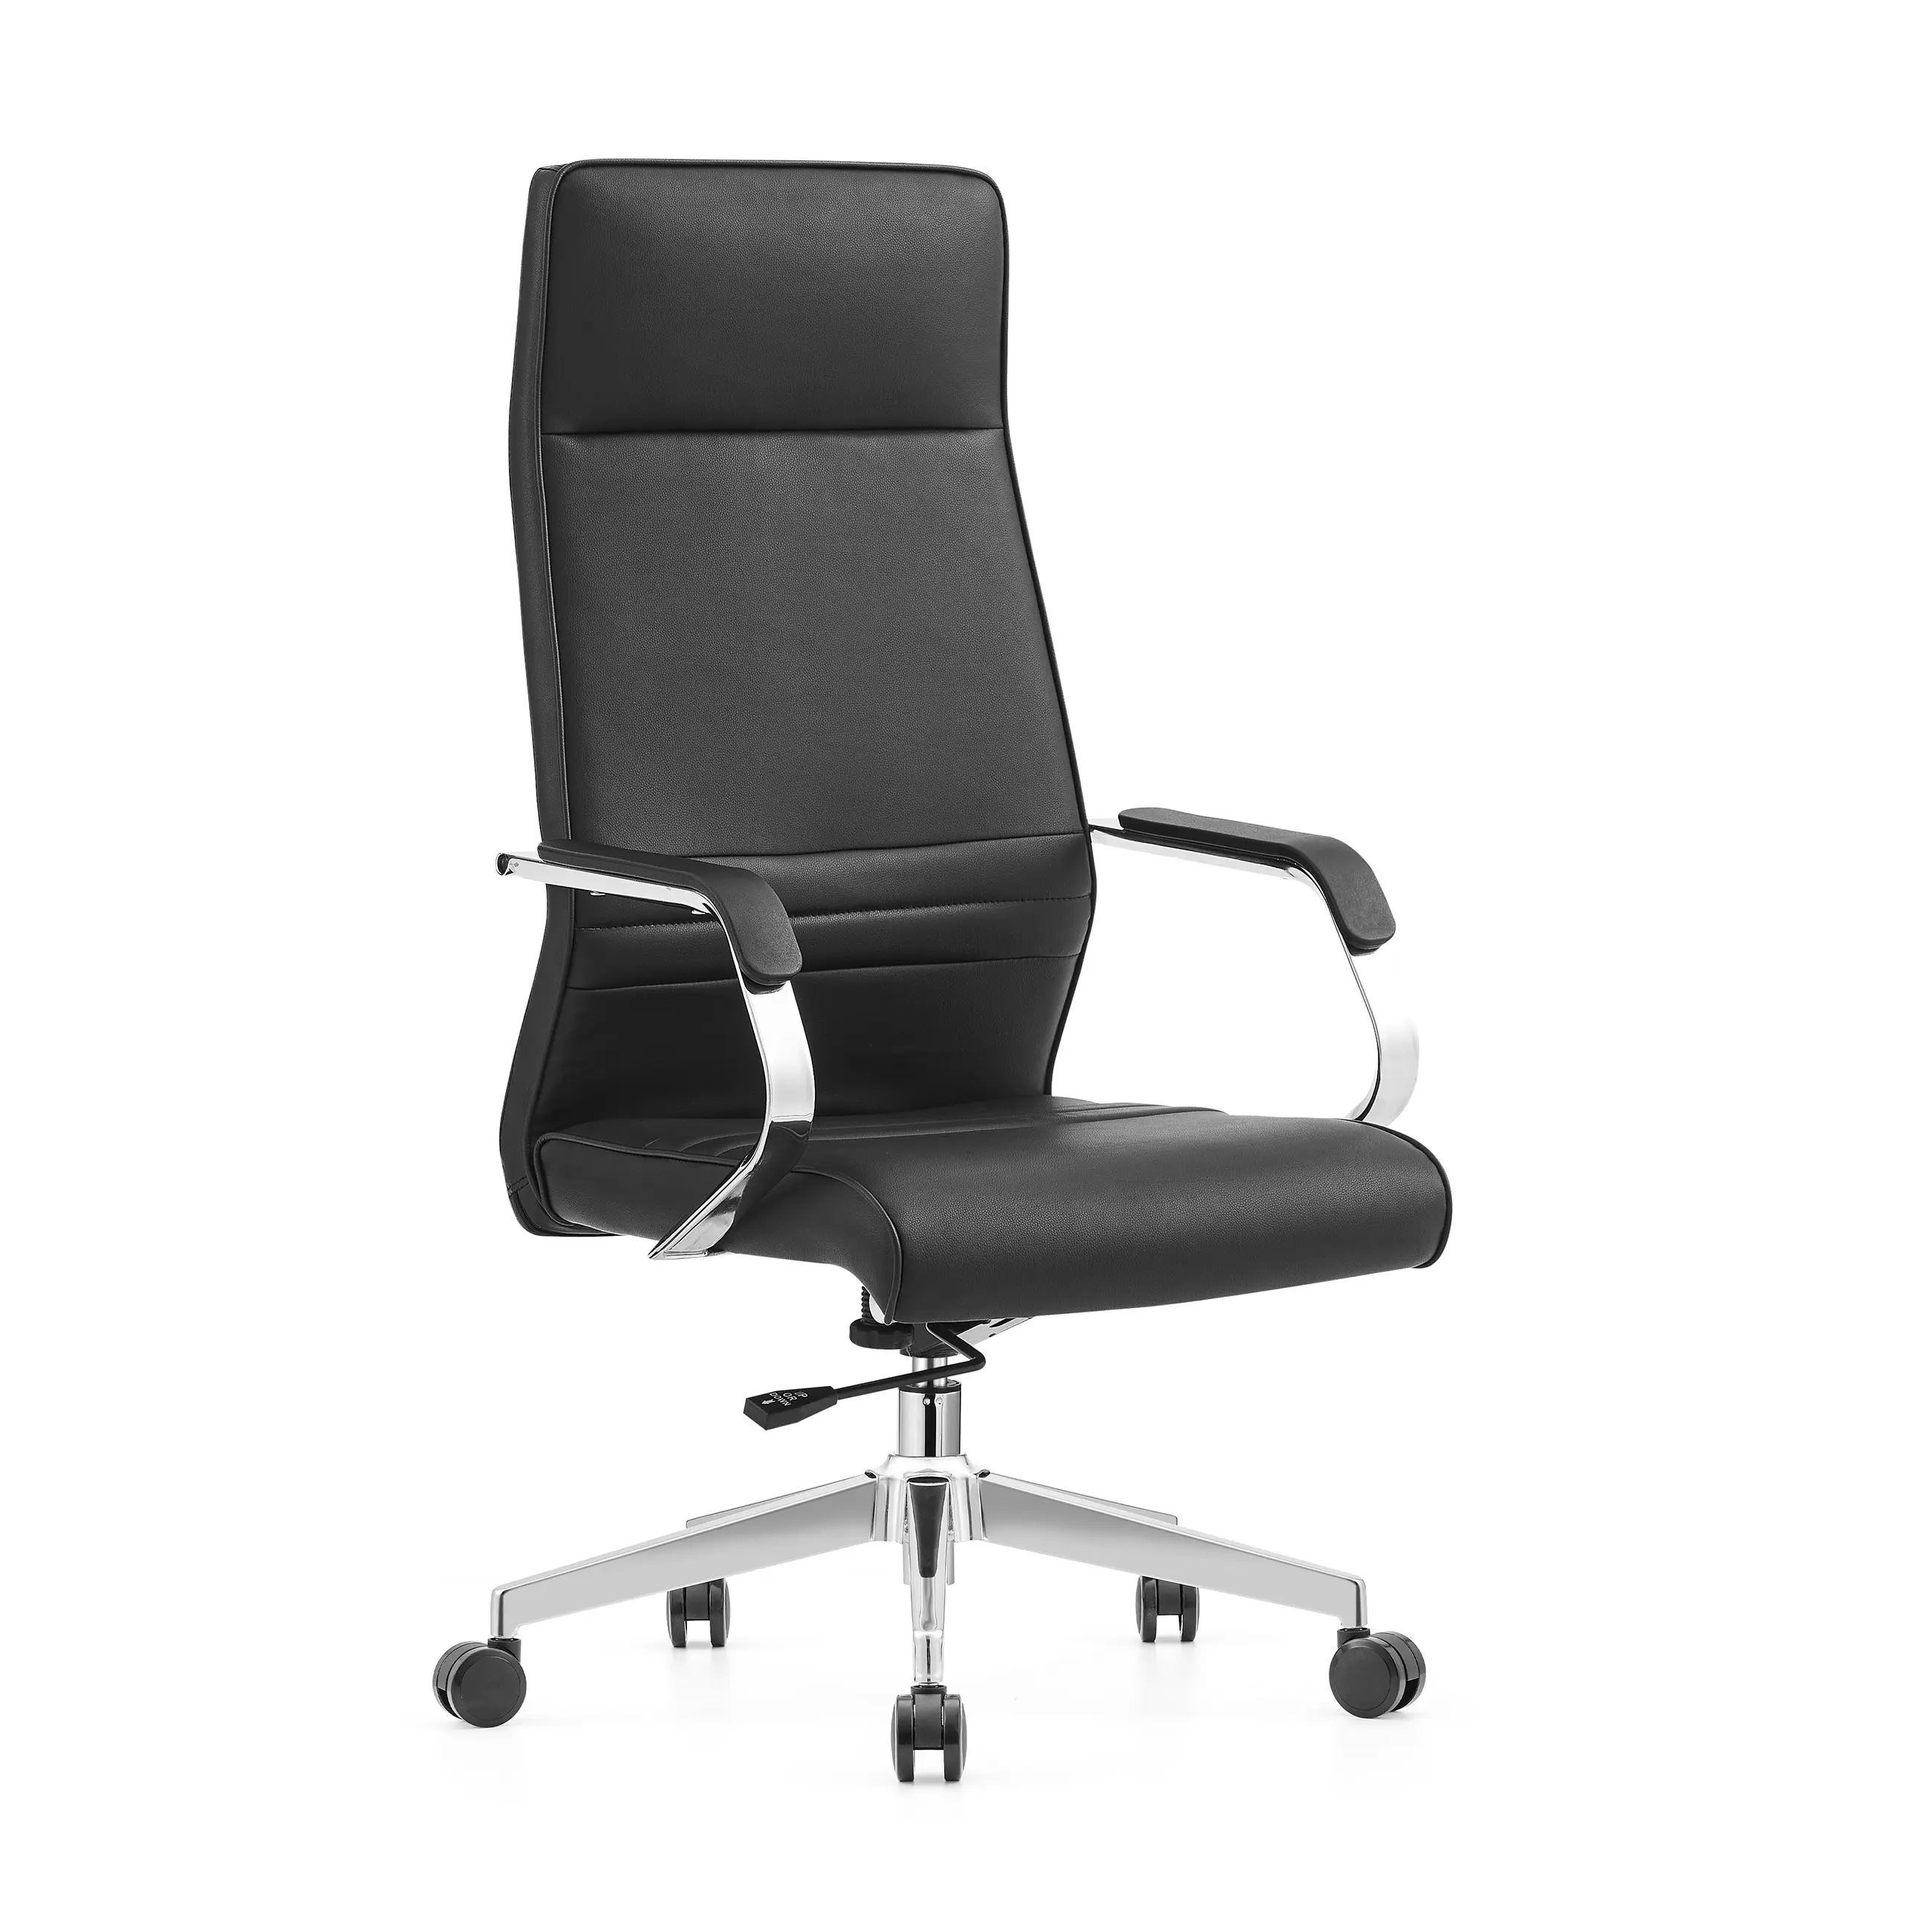 Comfortable modern chair Ergonomic Executive Office Chair with Flip up Arms Lumbar Support and Wheels